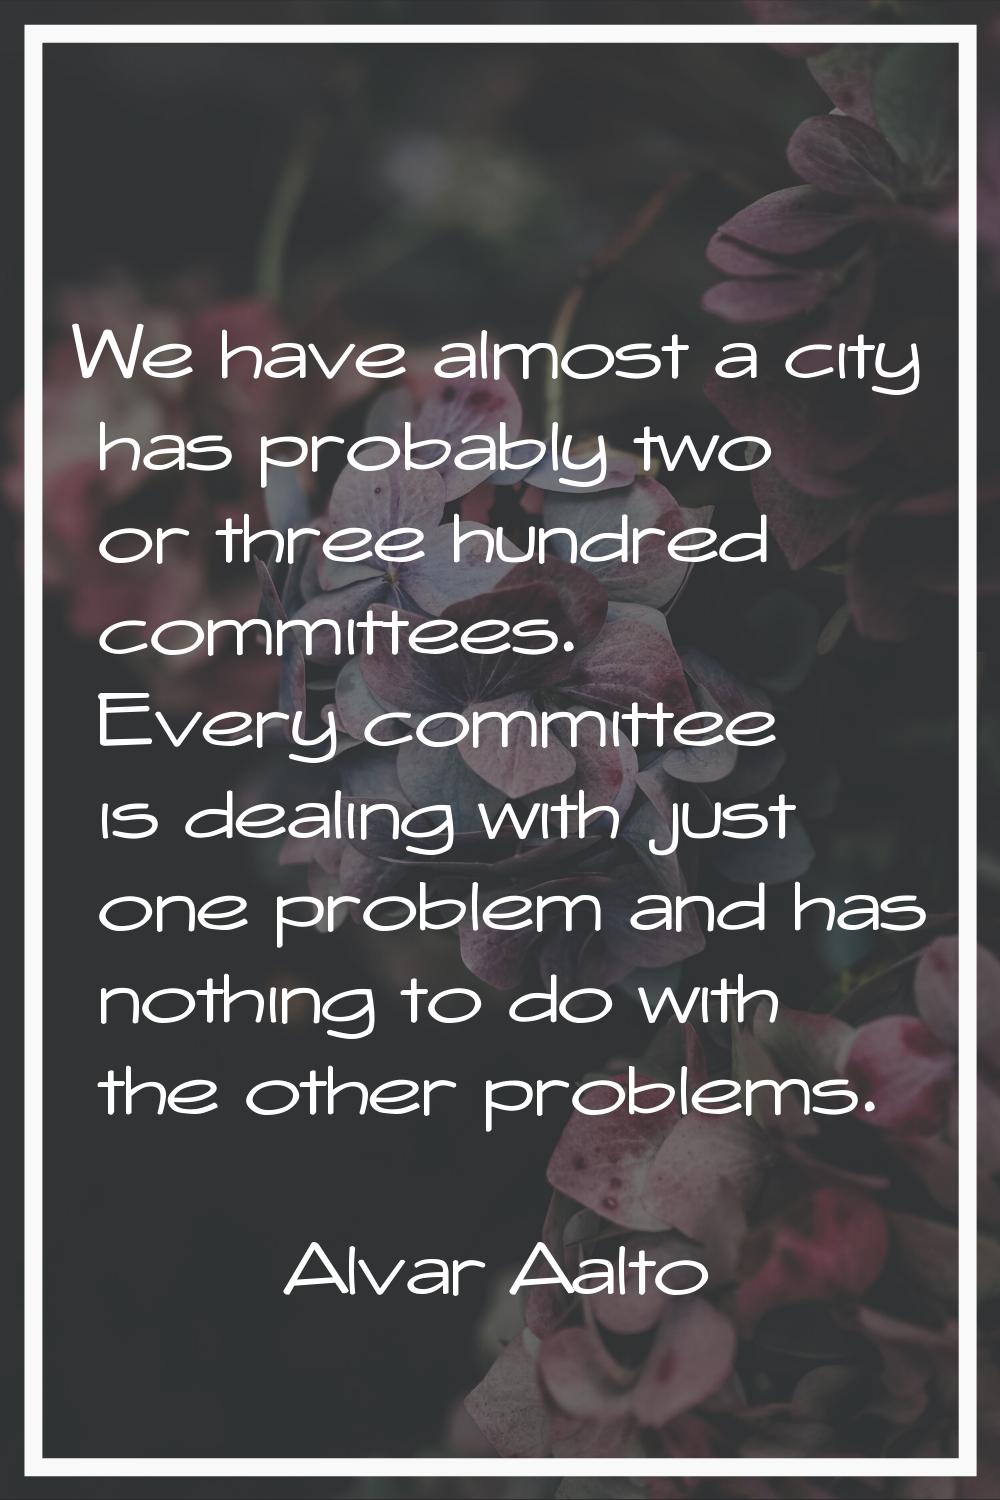 We have almost a city has probably two or three hundred committees. Every committee is dealing with